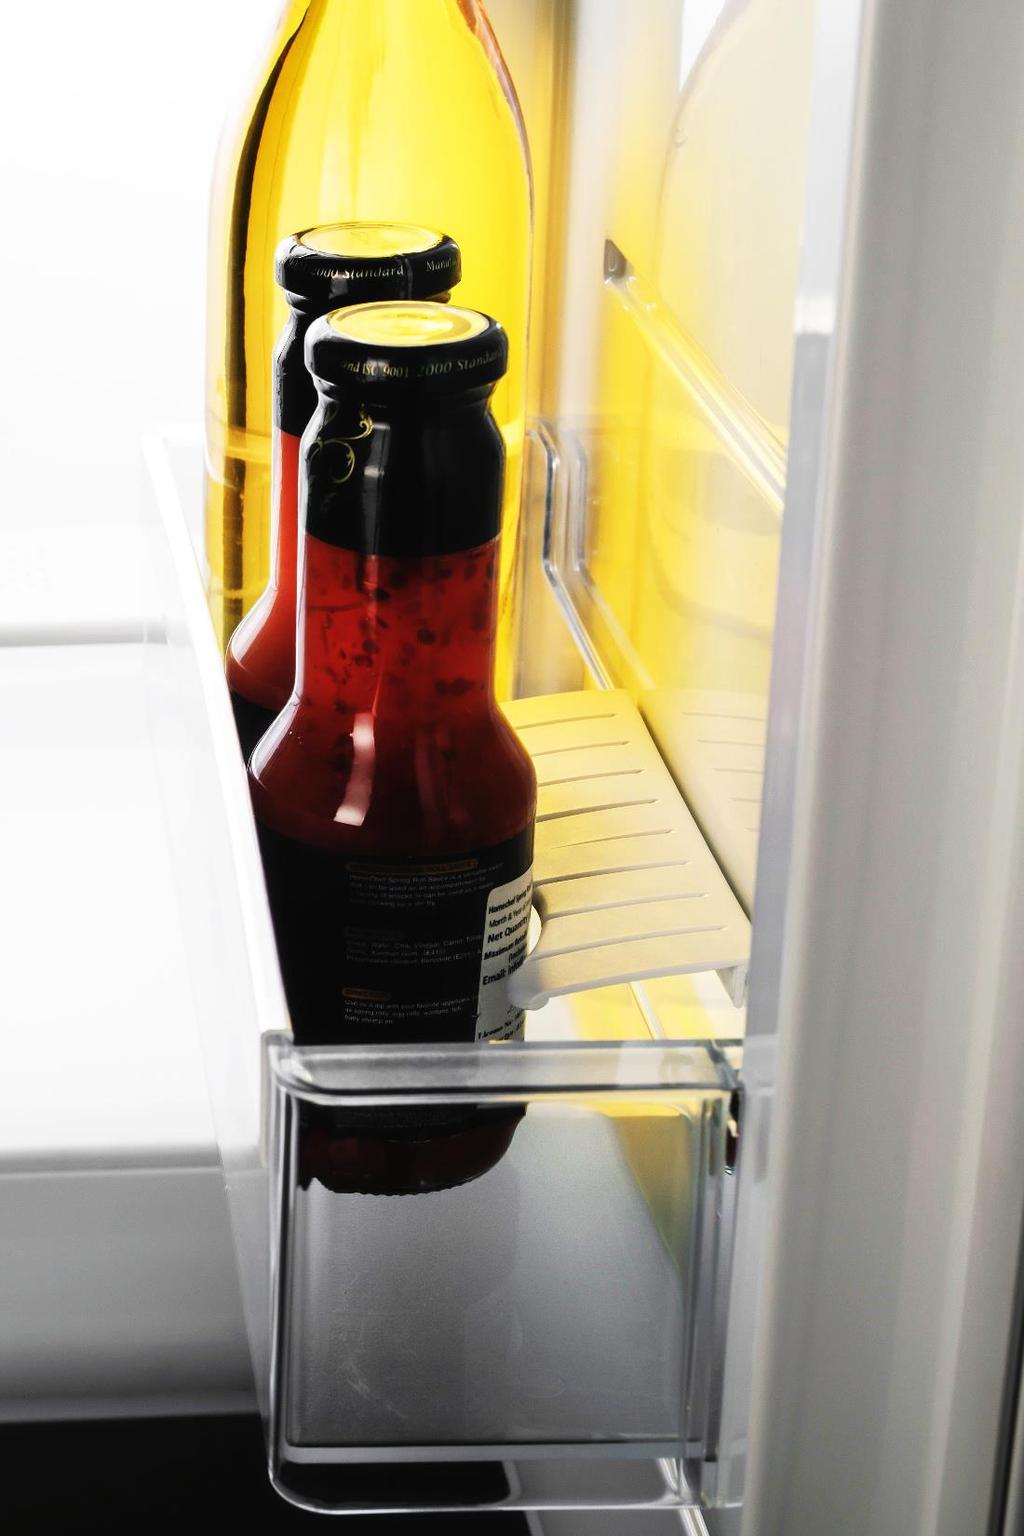 Often we struggle to keep the milk carton or a small bottle of sauce intact in the refrigerator. During the opening / closing of the door these bottles / cartons gets displaced or even fall.